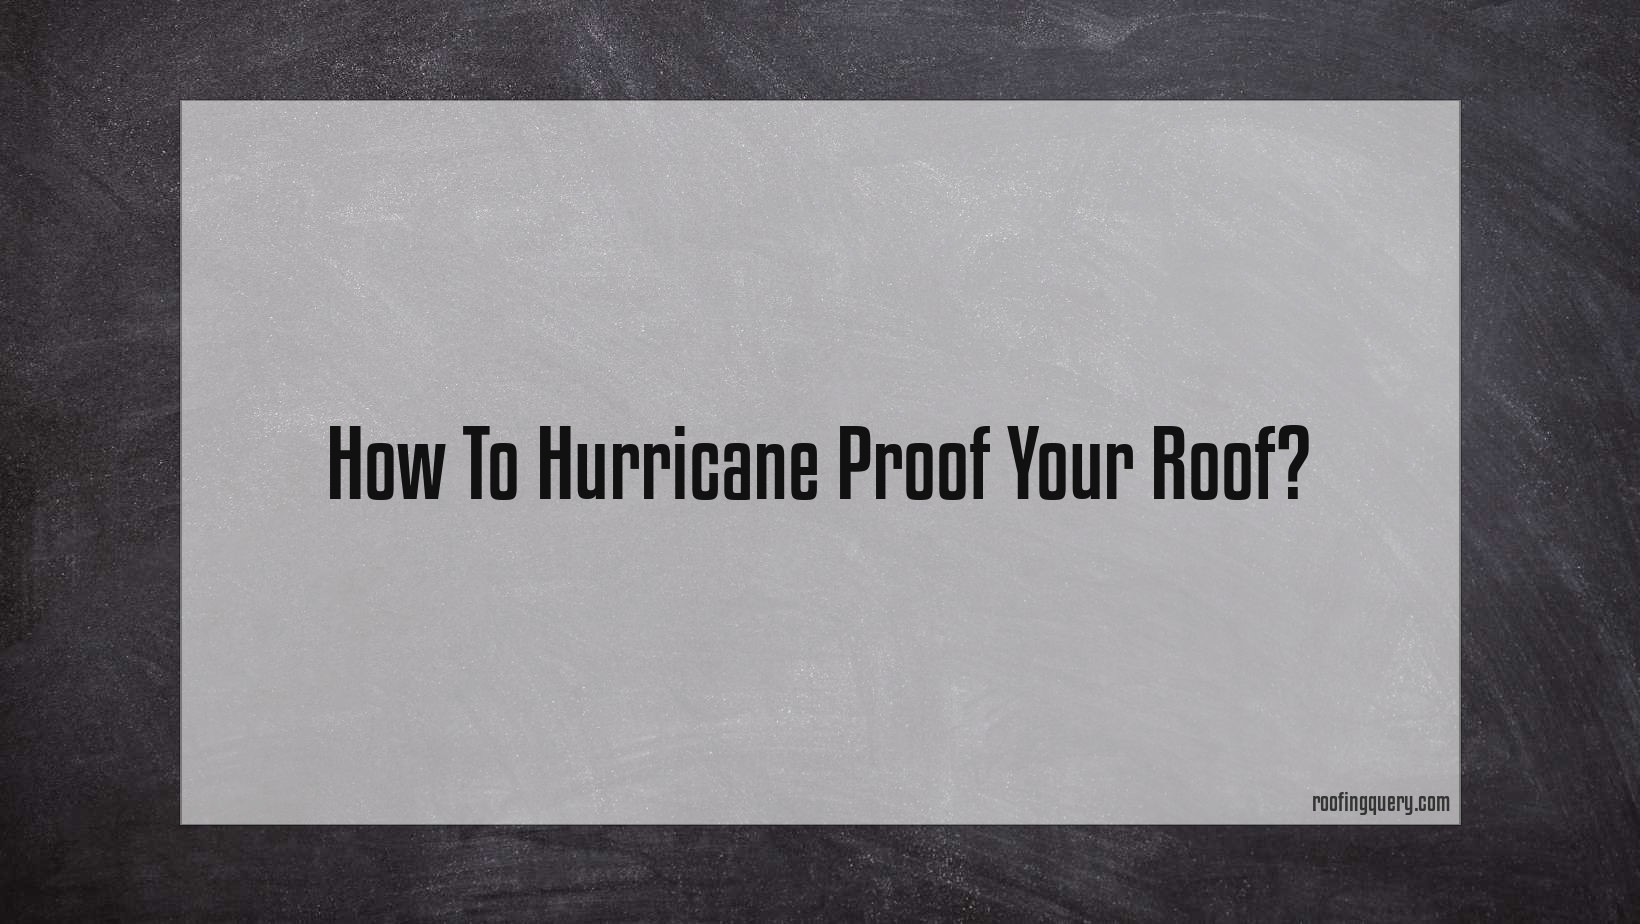 How To Hurricane Proof Your Roof?